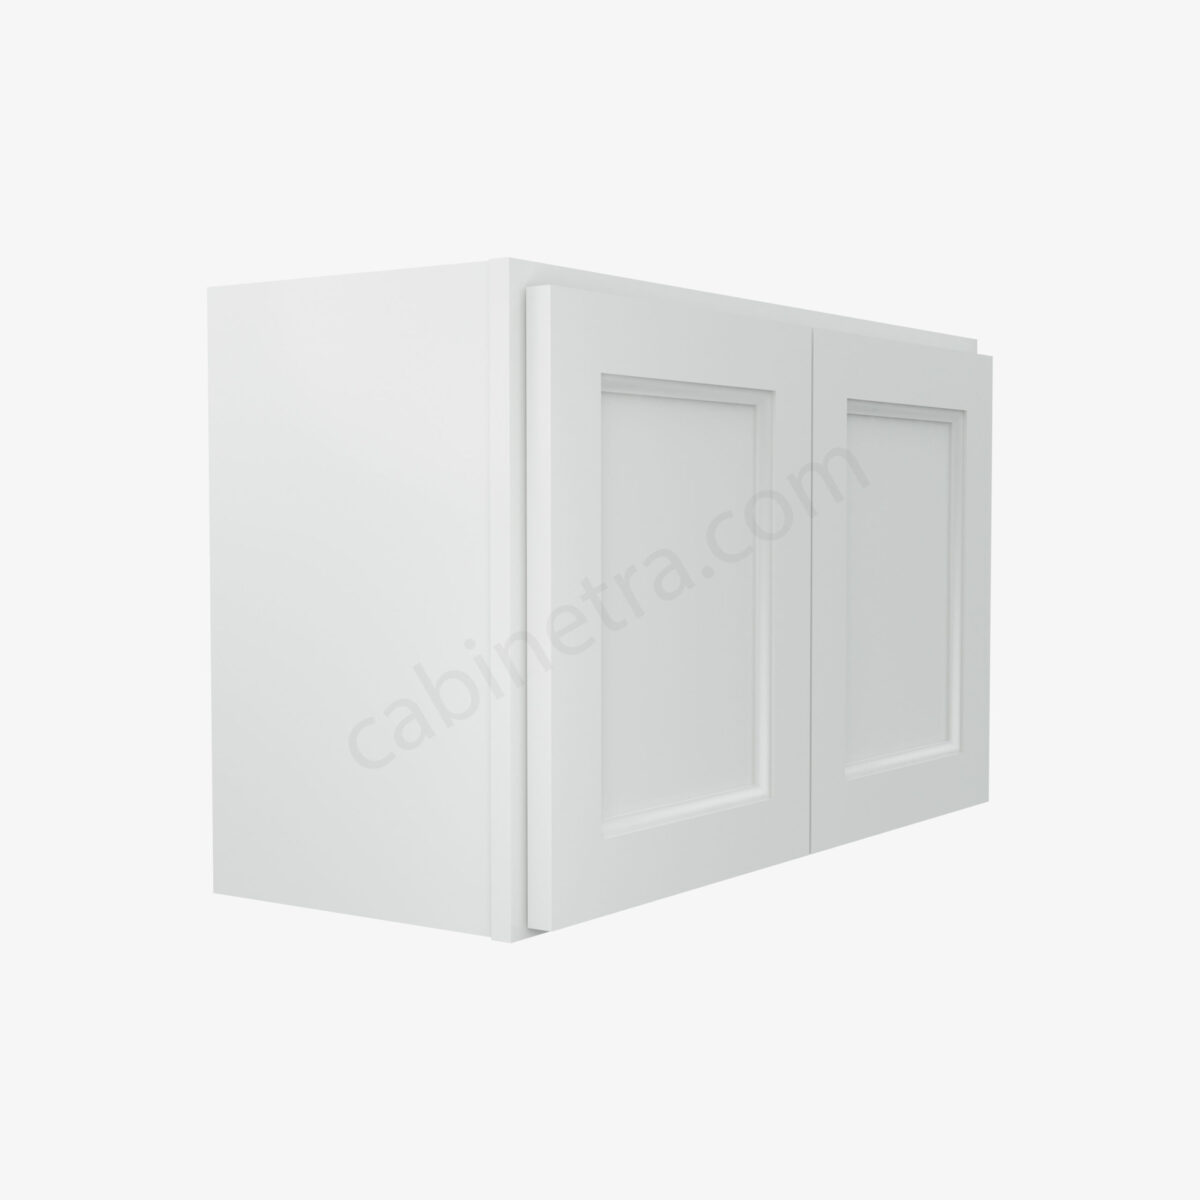 TW W3018B 4 Forevermark Uptown White Cabinetra scaled